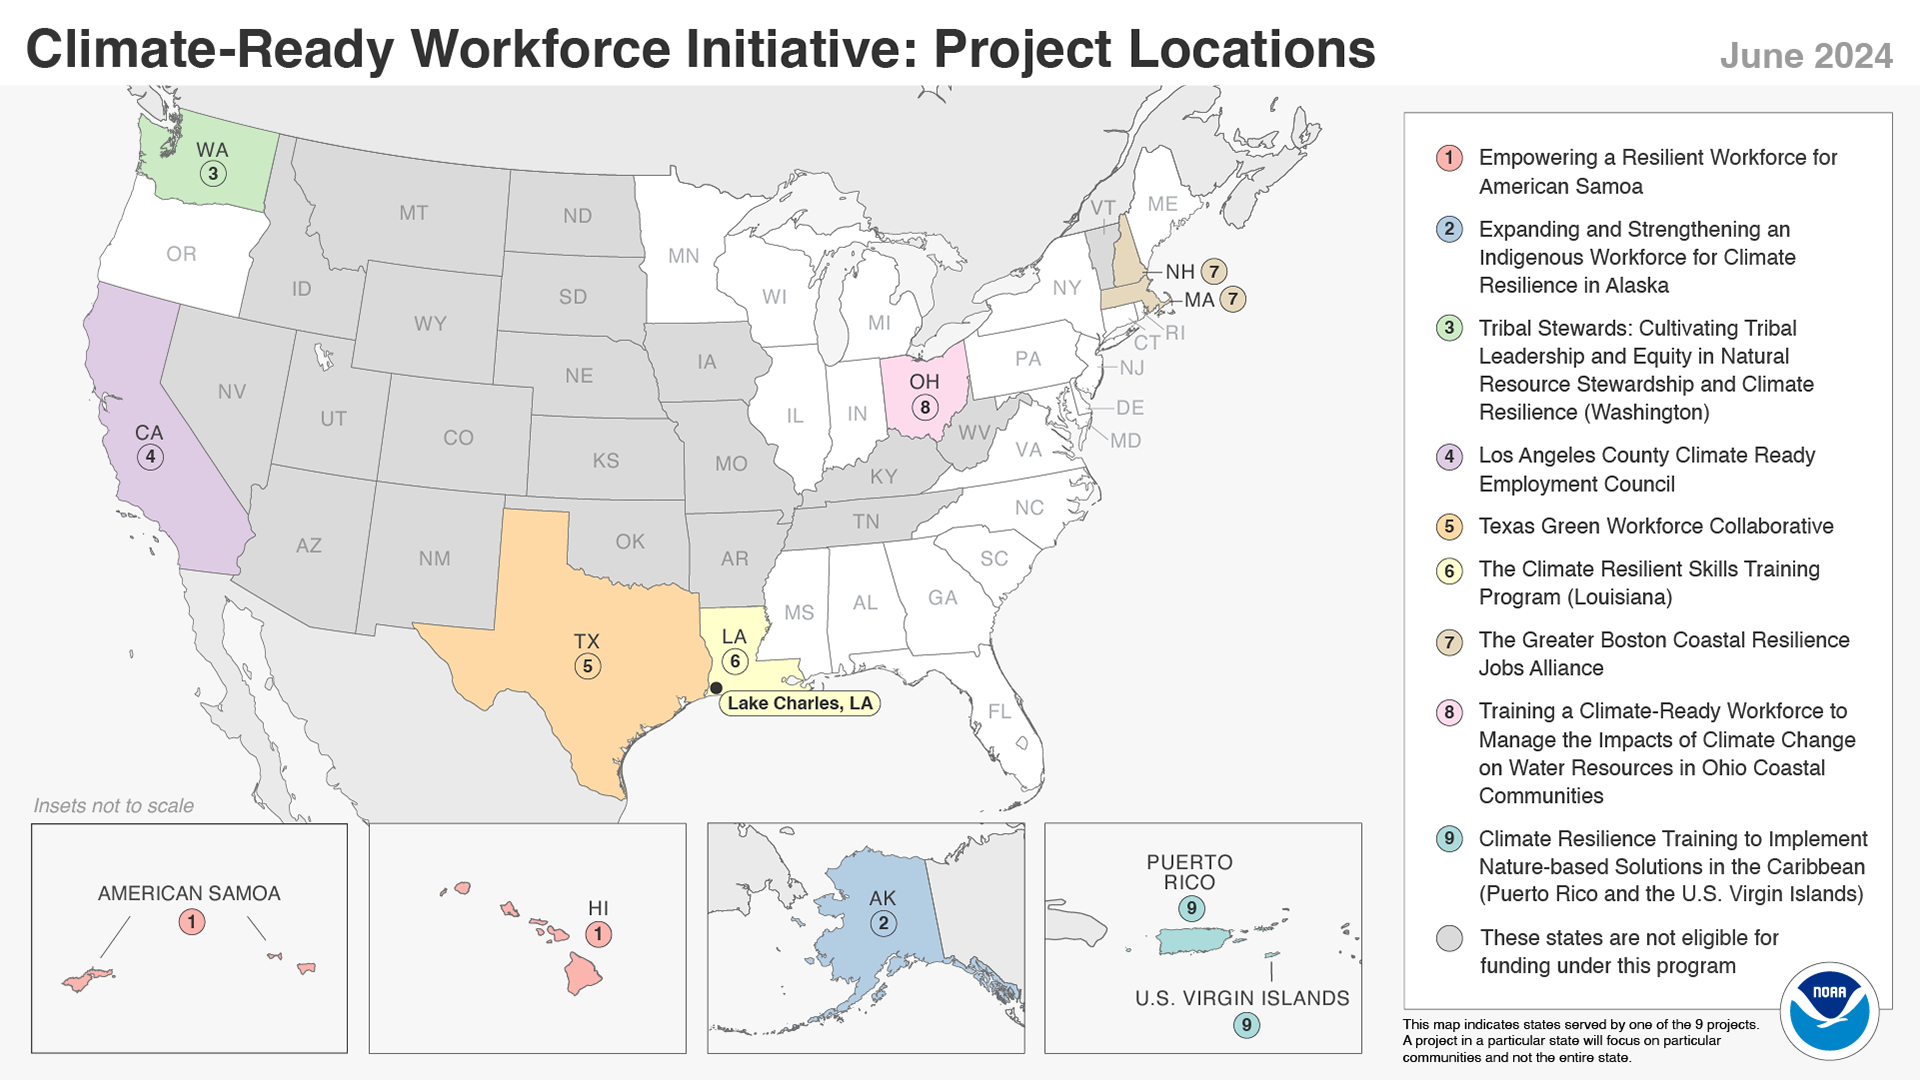 Map showING the coastal and Great Lakes states and U.S. territories where nine Climate-Ready Workforce projects will develop worker training that leads to job placement for Americans over the next four years. The workers will be placed in good jobs focused on building climate resilience in their communities. Jobs will be created in each of the states and territories shown on the map. (NOAA)